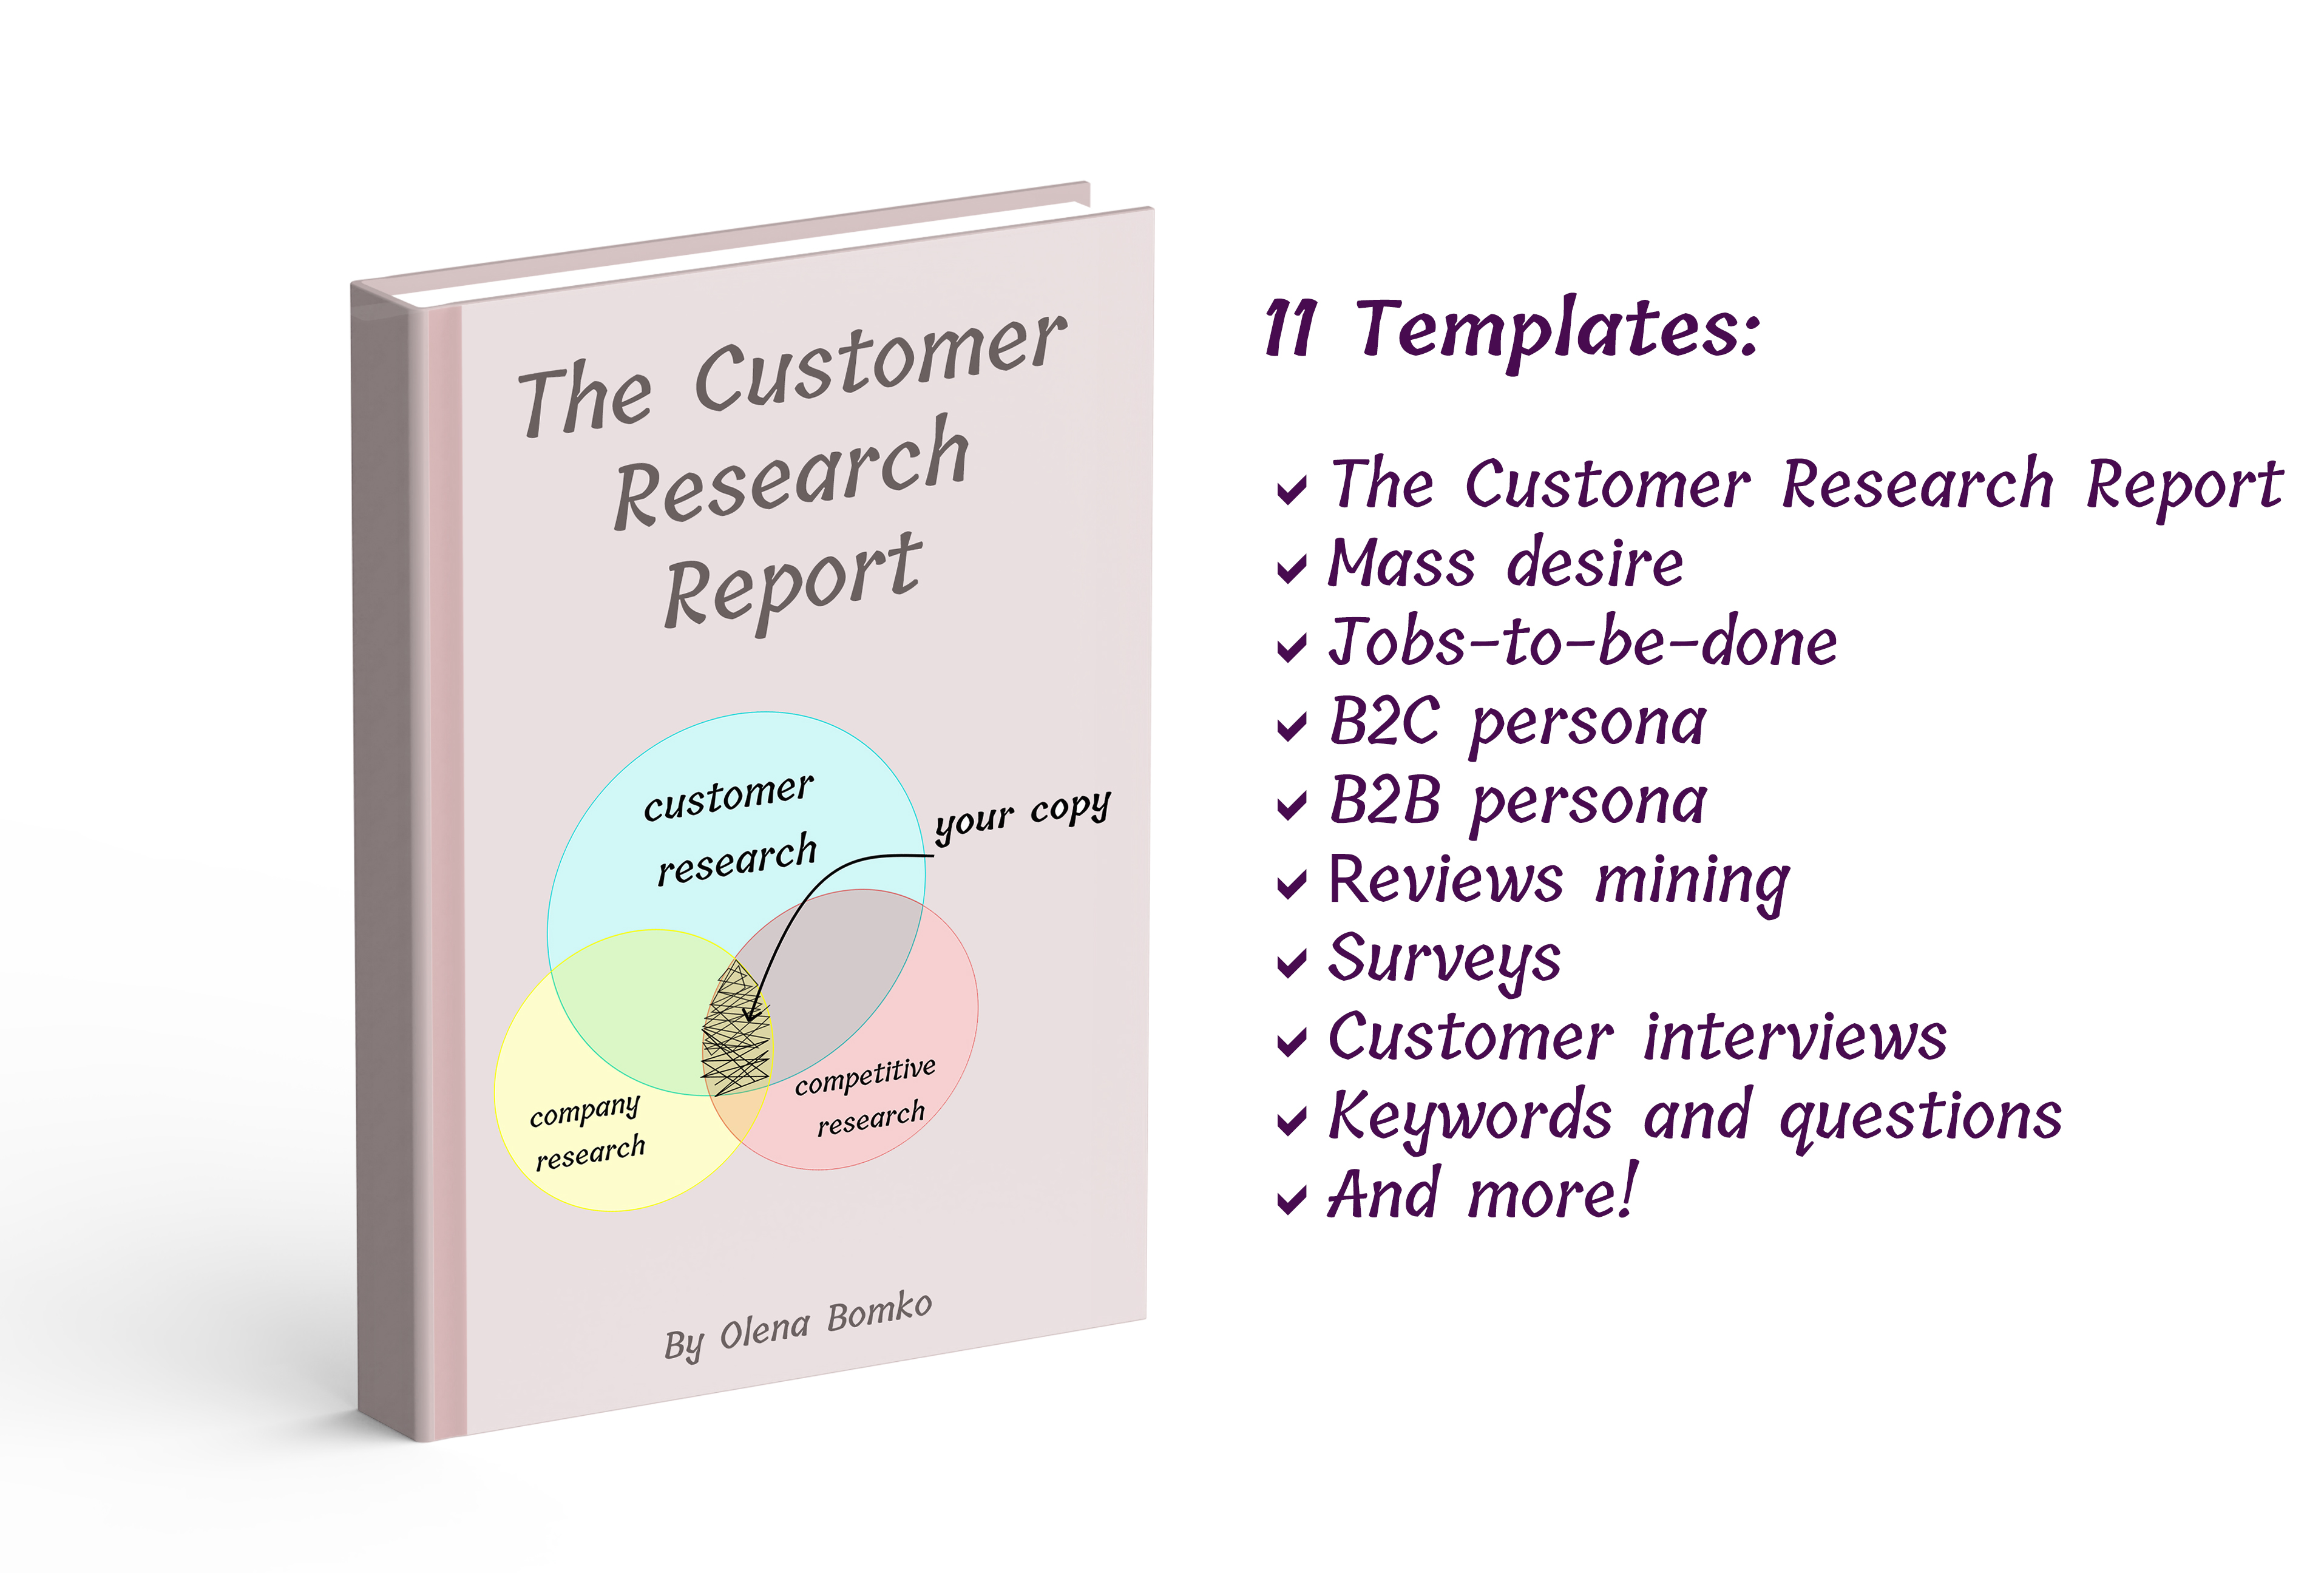 The Customer Research Report